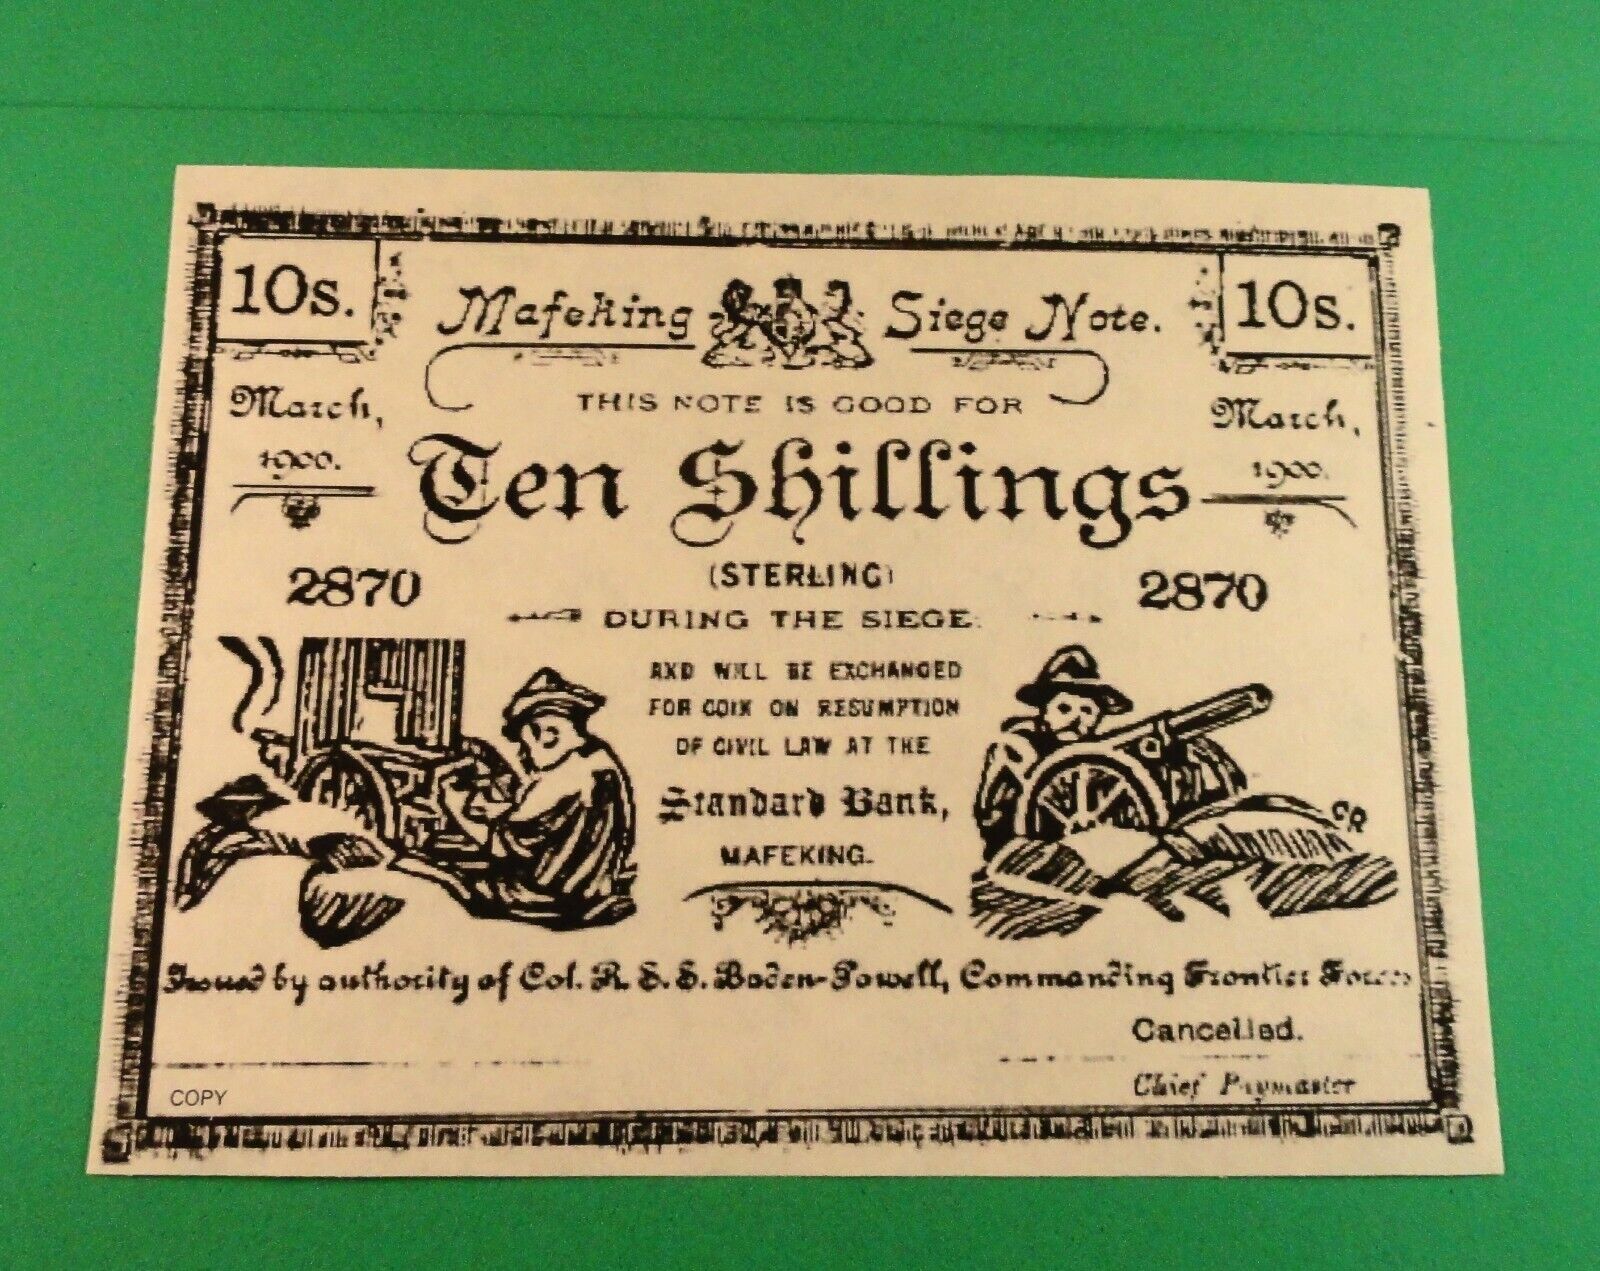 Limited Edition Print of Baden Powell TEN SHILLING Mafeking SEIGE NOTE 1900 Made